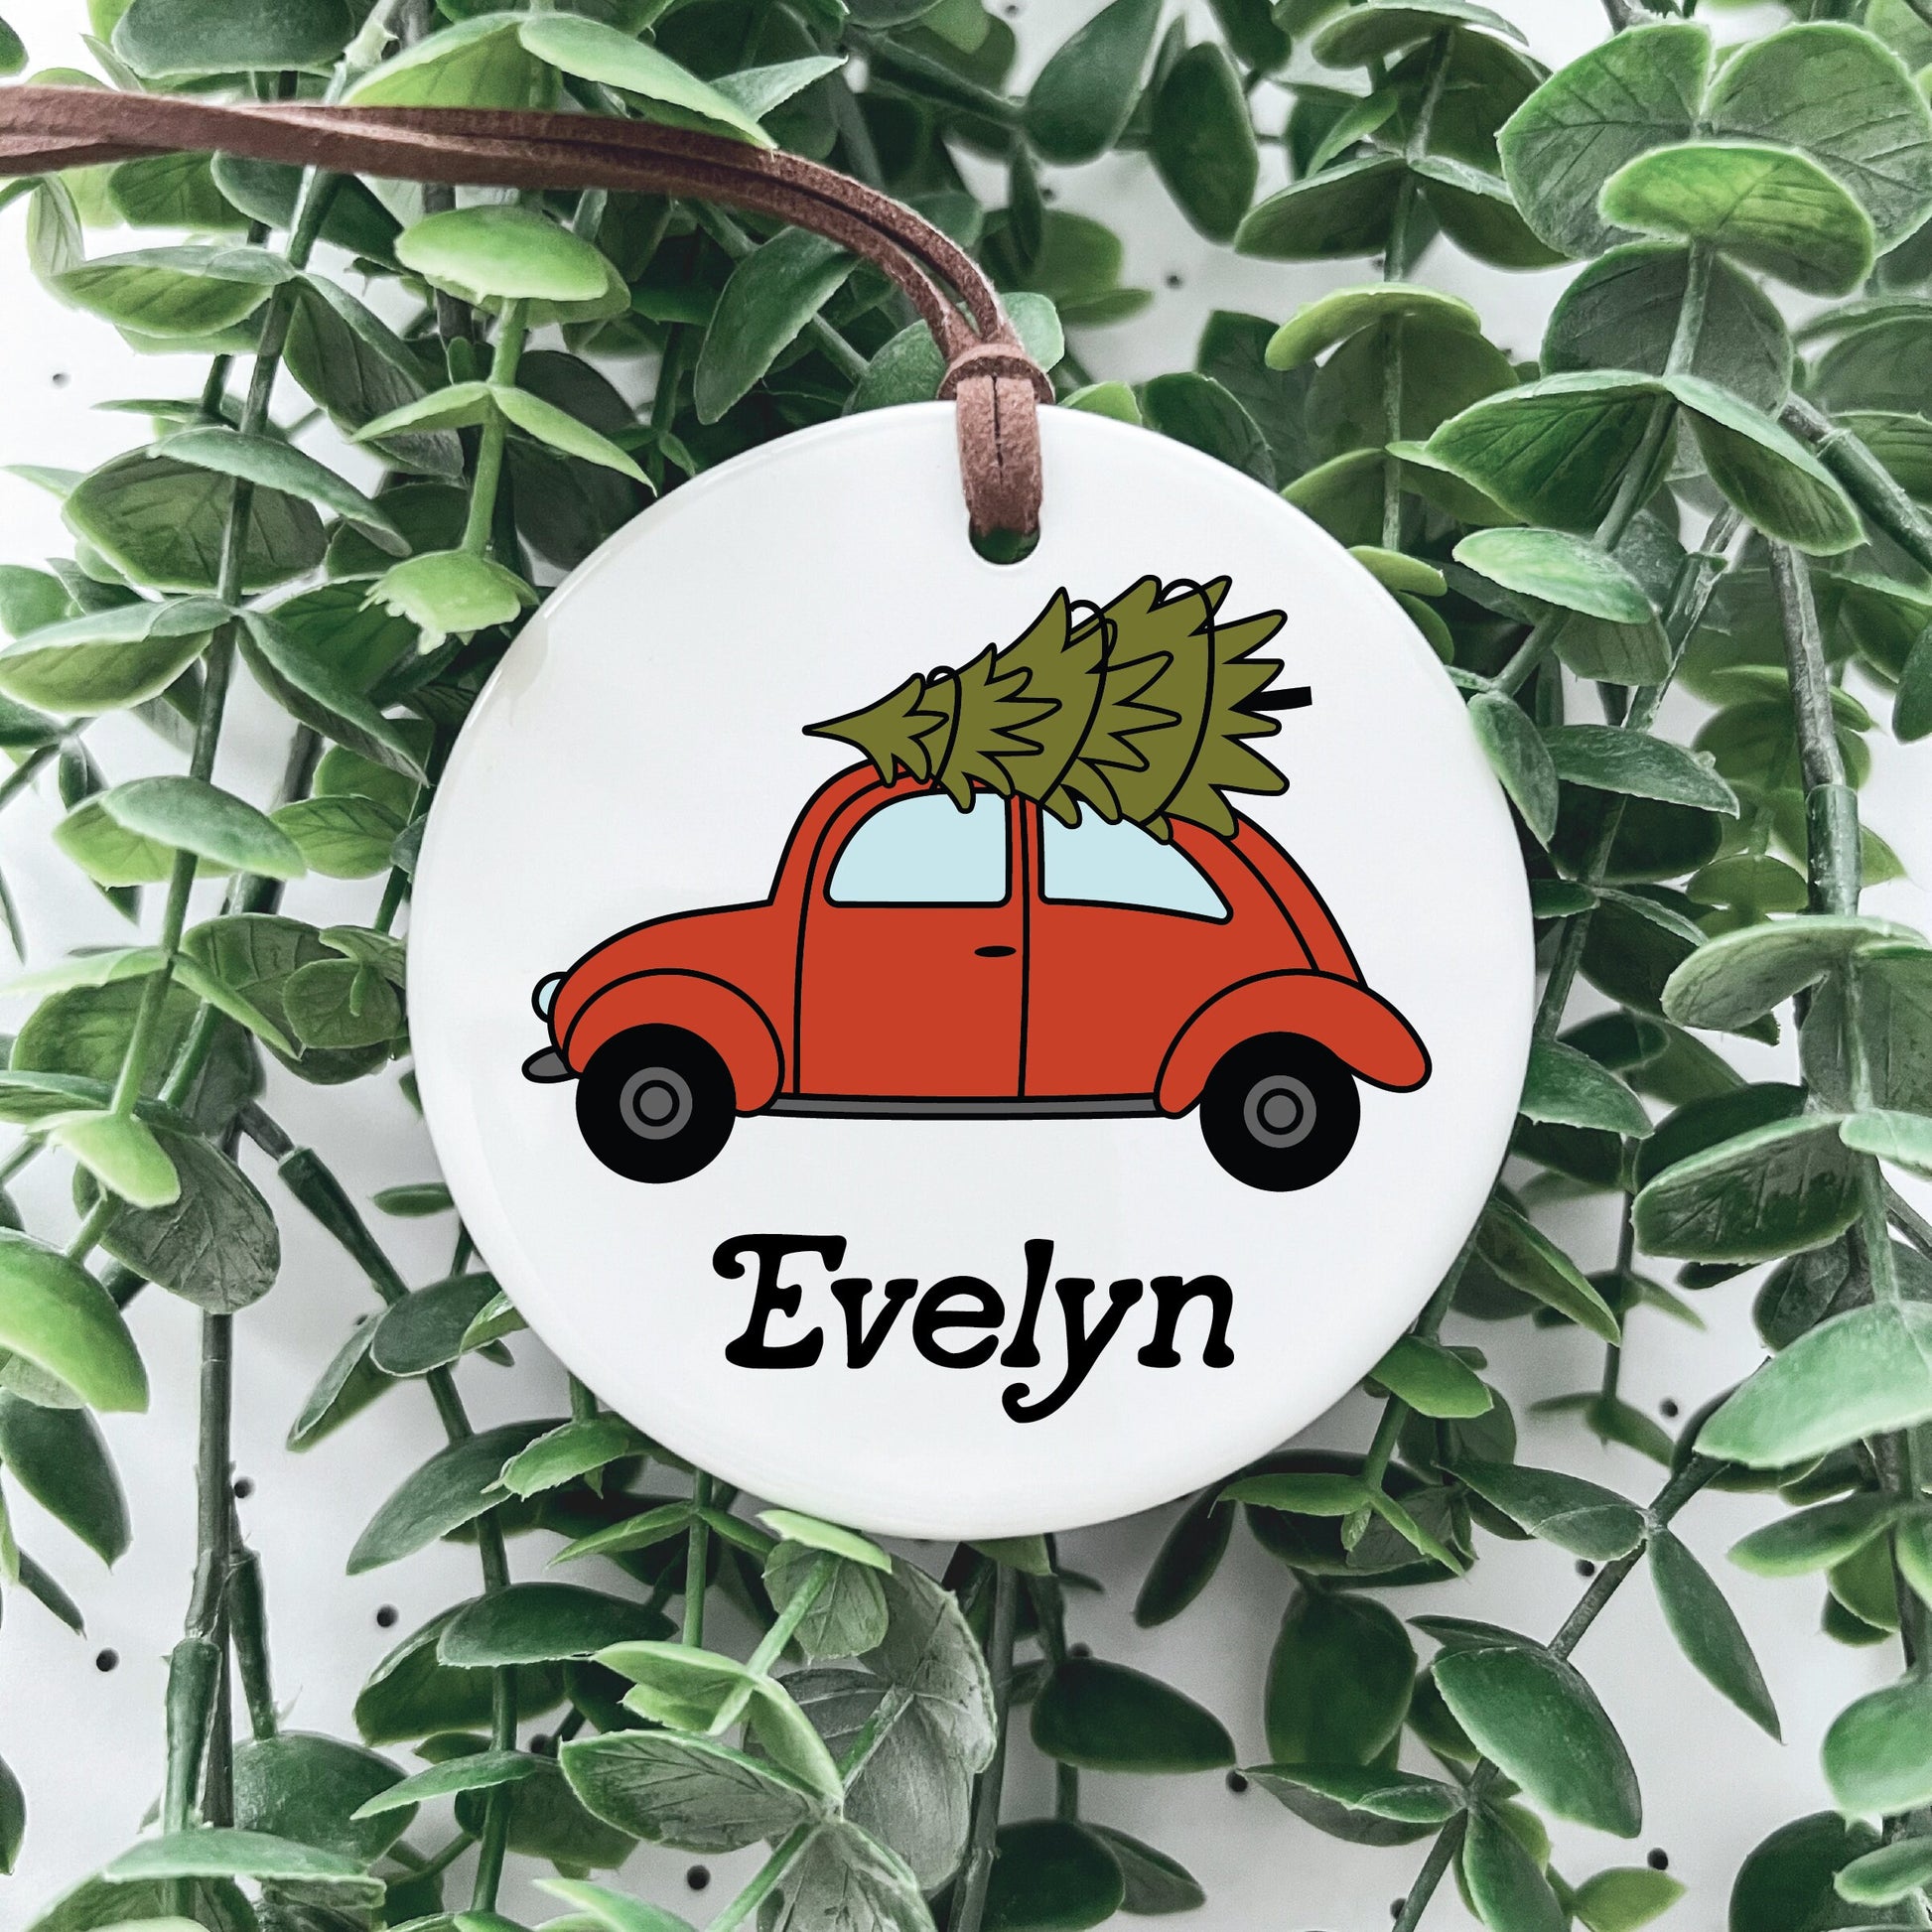 Christmas Ornament / Ceramic Porcelain Ornament / Baby Birth Stats / Personalized Newborn Ornament / Gift for New Parents / Red VW Buggy